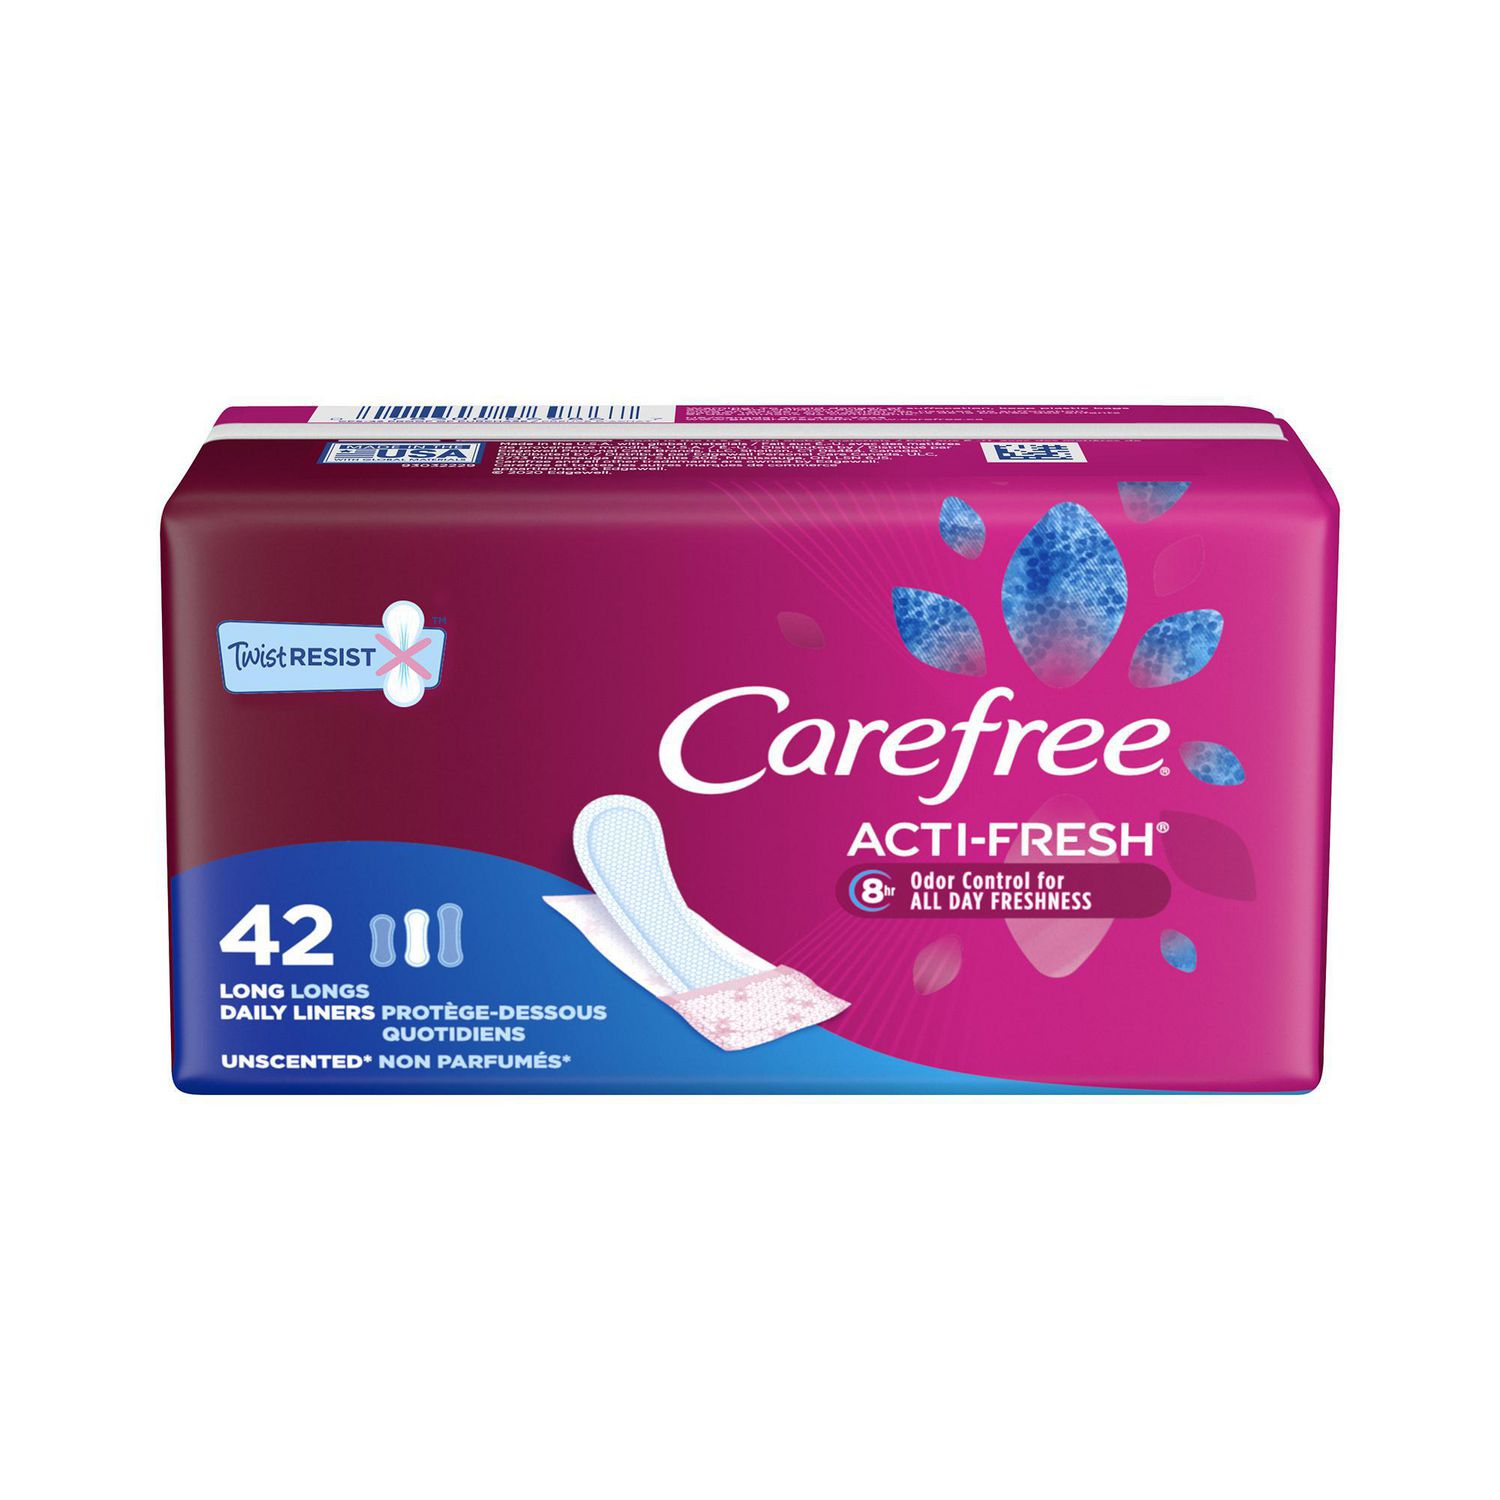 FSA Eligible | Carefree Acti-Fresh Extra Long Pantiliners, Unscented, 36 ct.